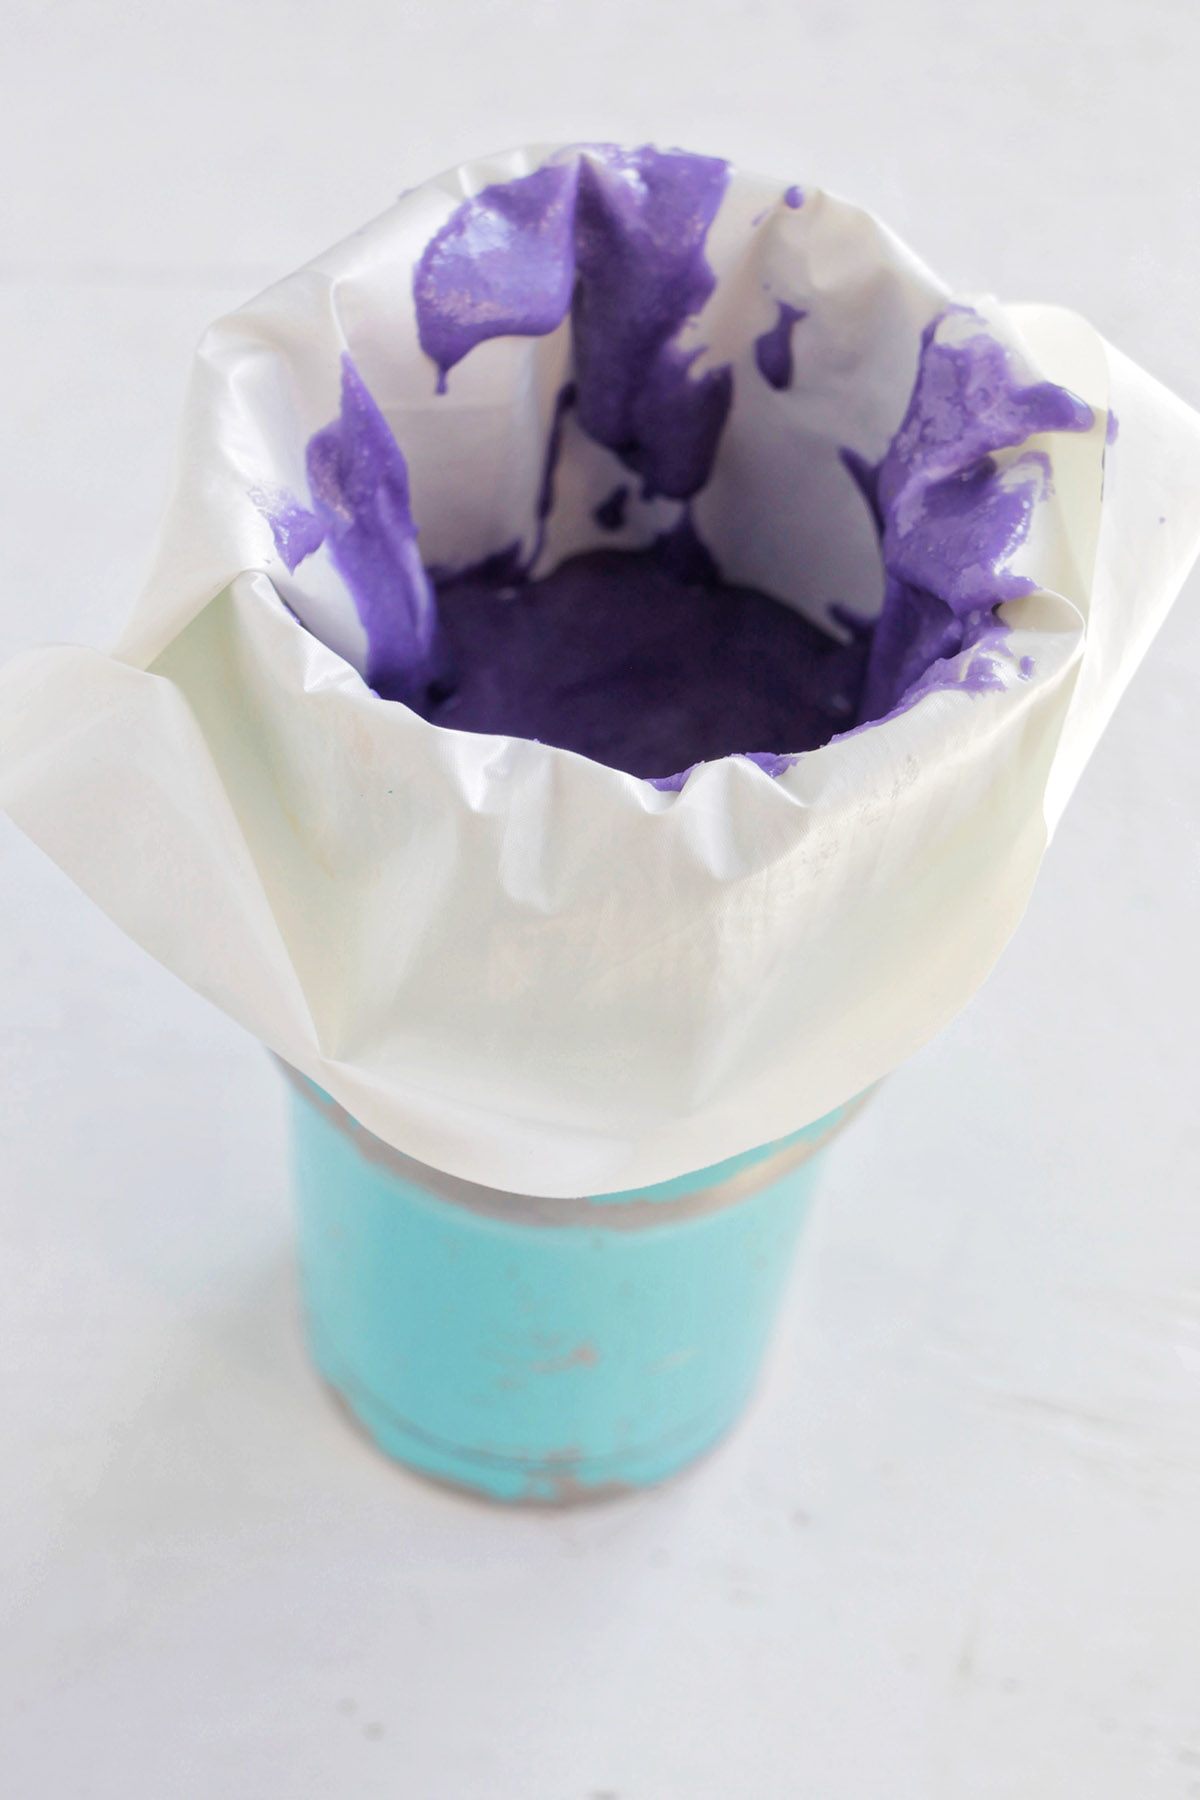 tall blue glass holding a piping bag filled with purple macaron batter.